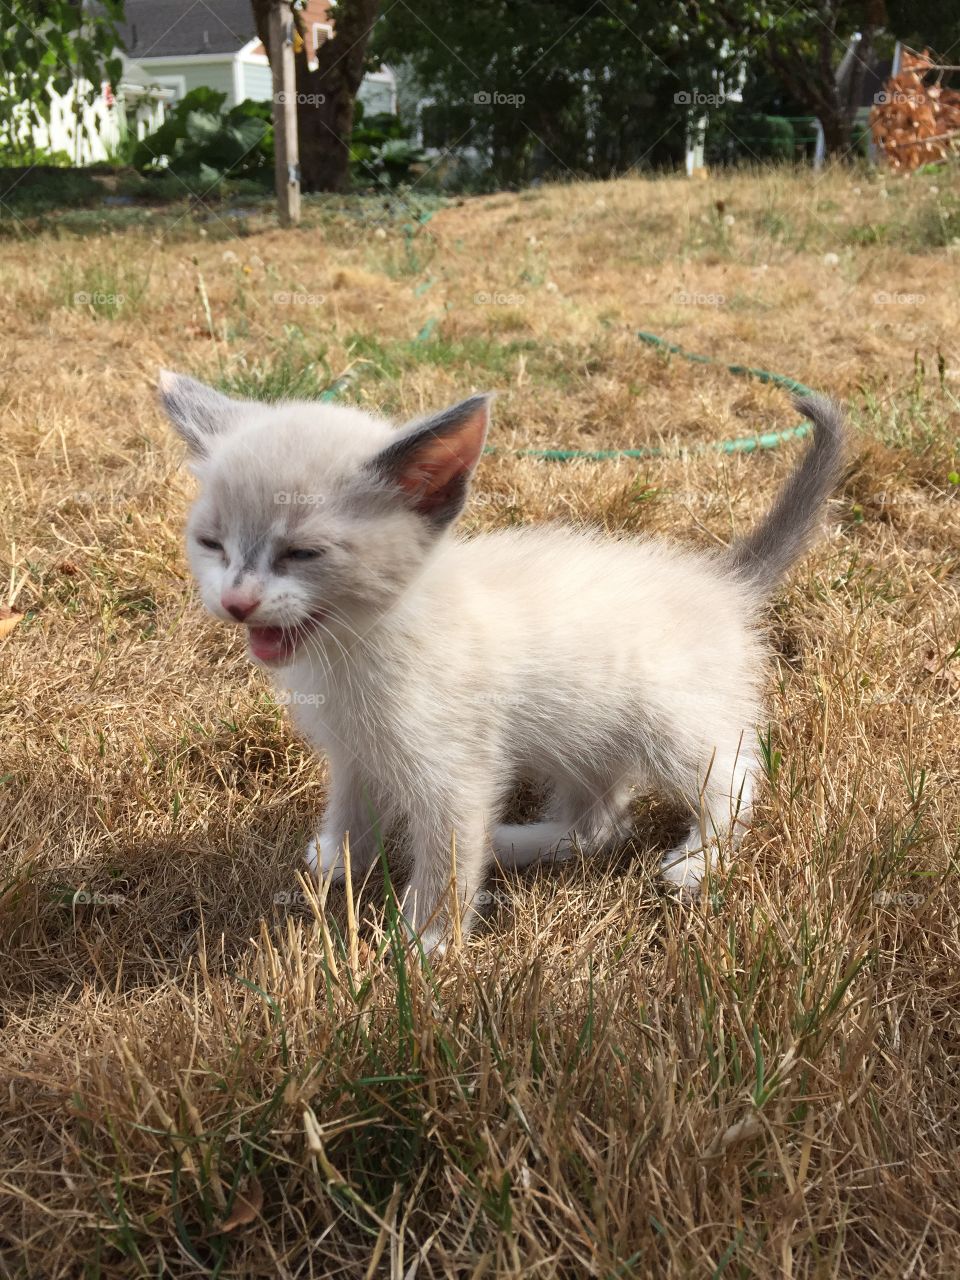 Meowing baby kitten in the grass